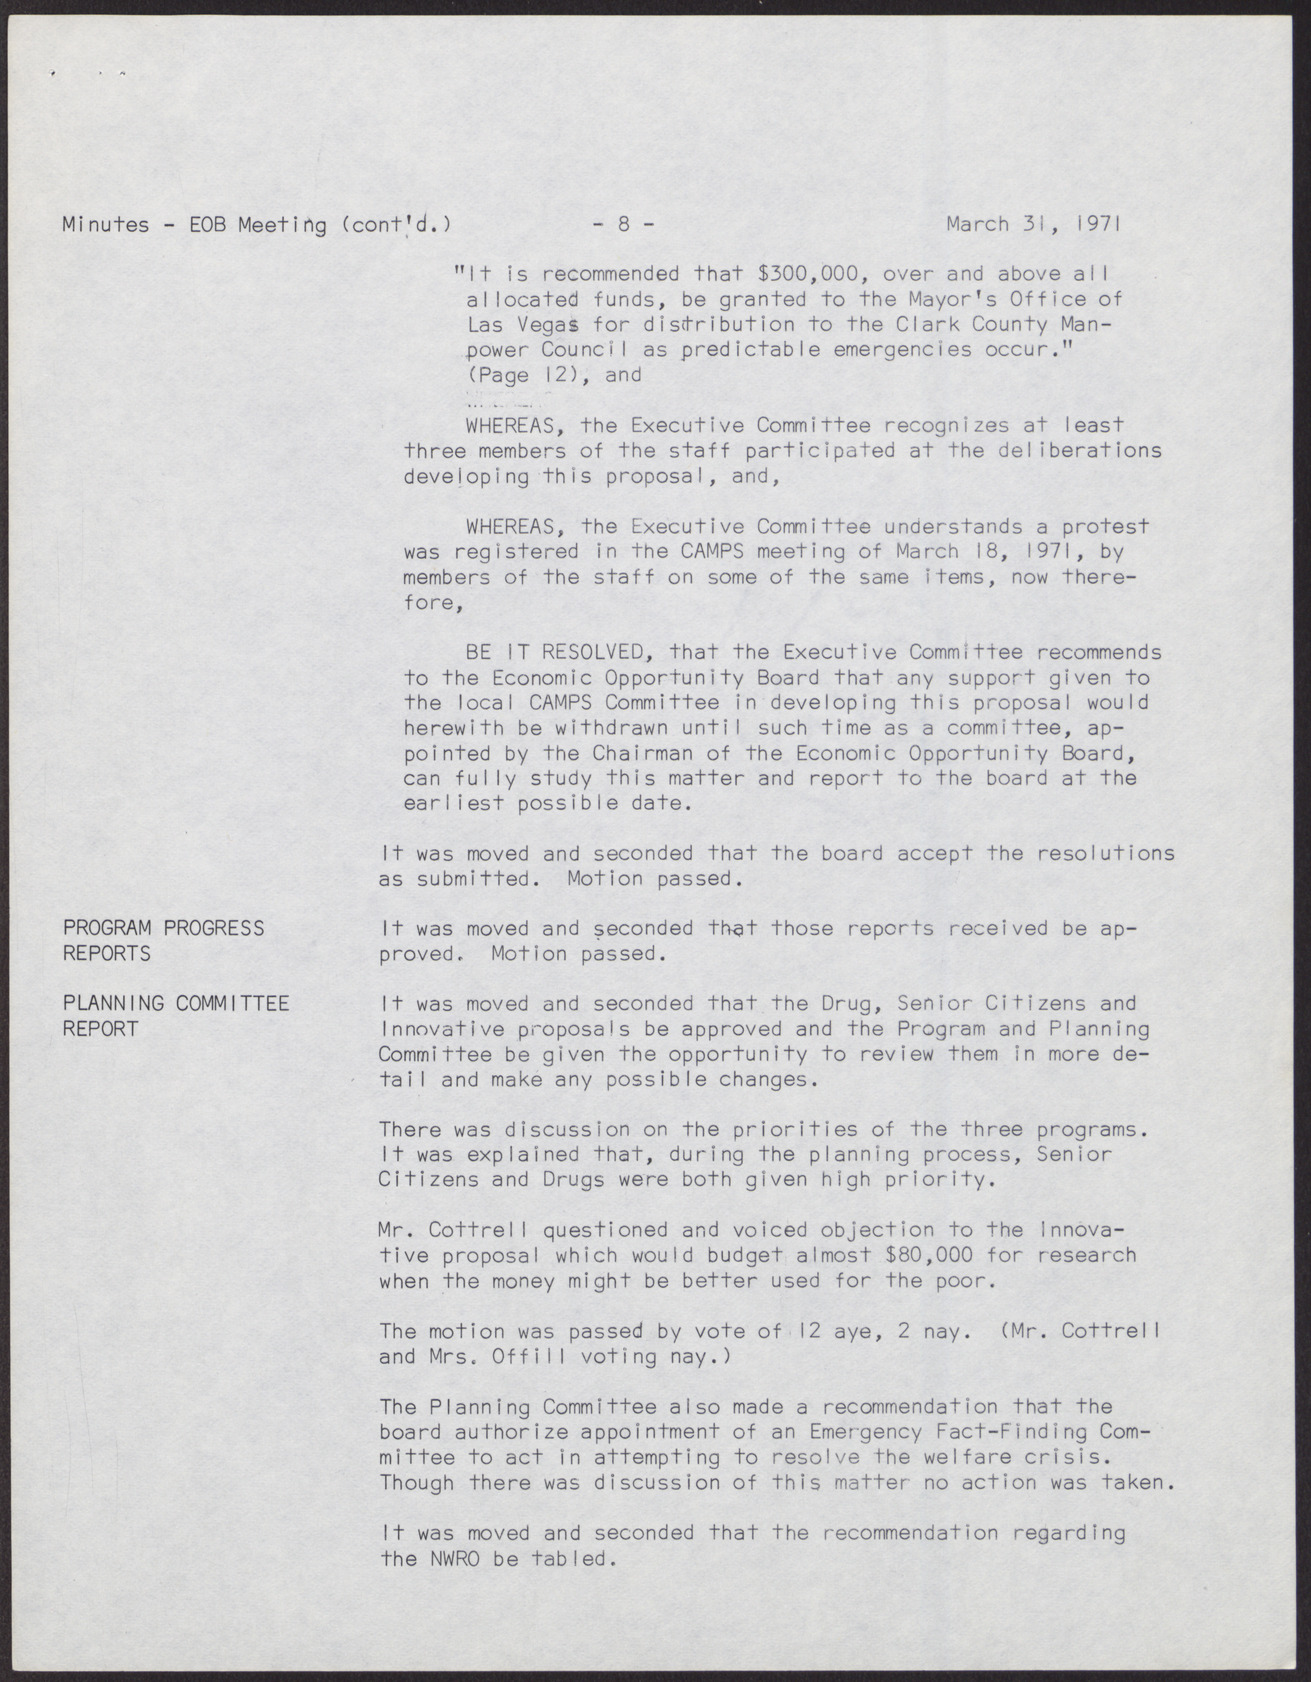 Minutes from Economic Opportunity Board meeting (9 pages), March 31, 1971, page 8